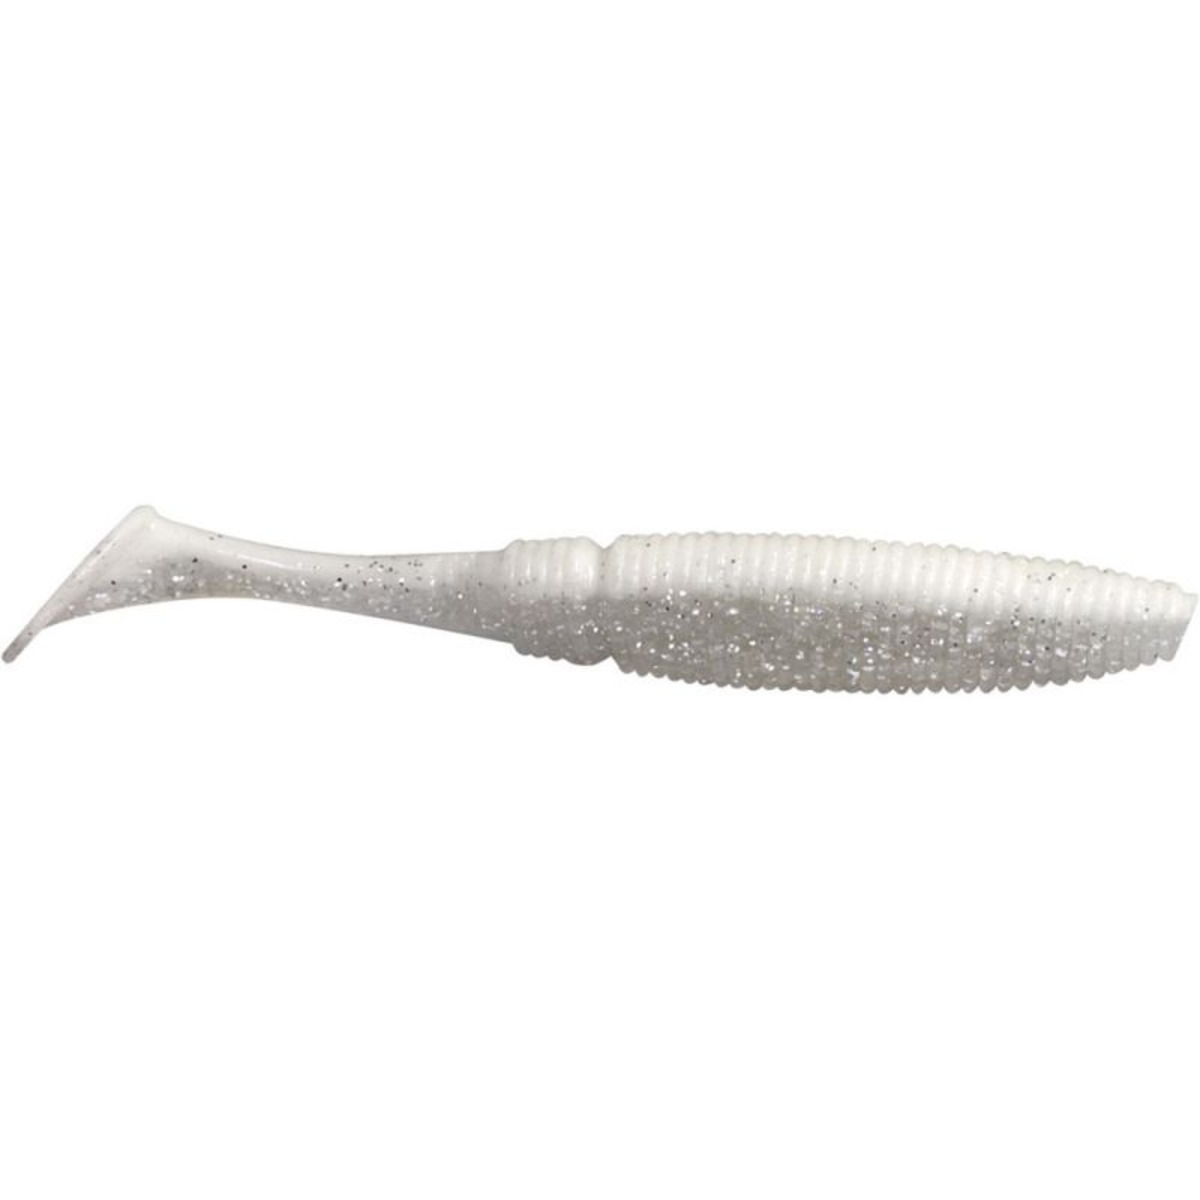 Rapture Power Shad - 11.5 cm - White Ghost